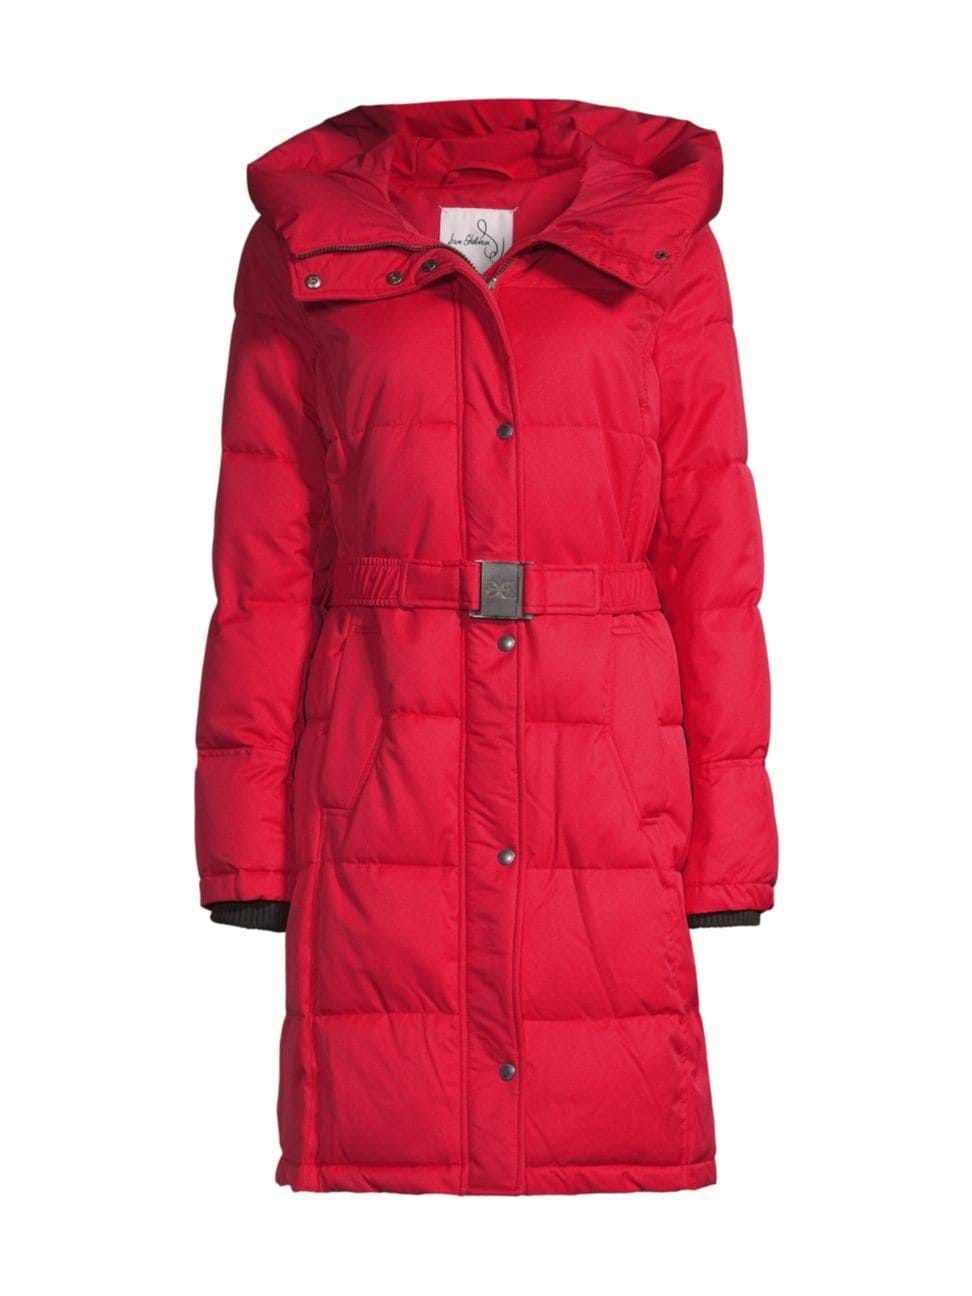 Sam Edelman's Belted Longline Puffer Jacket in Red | Image